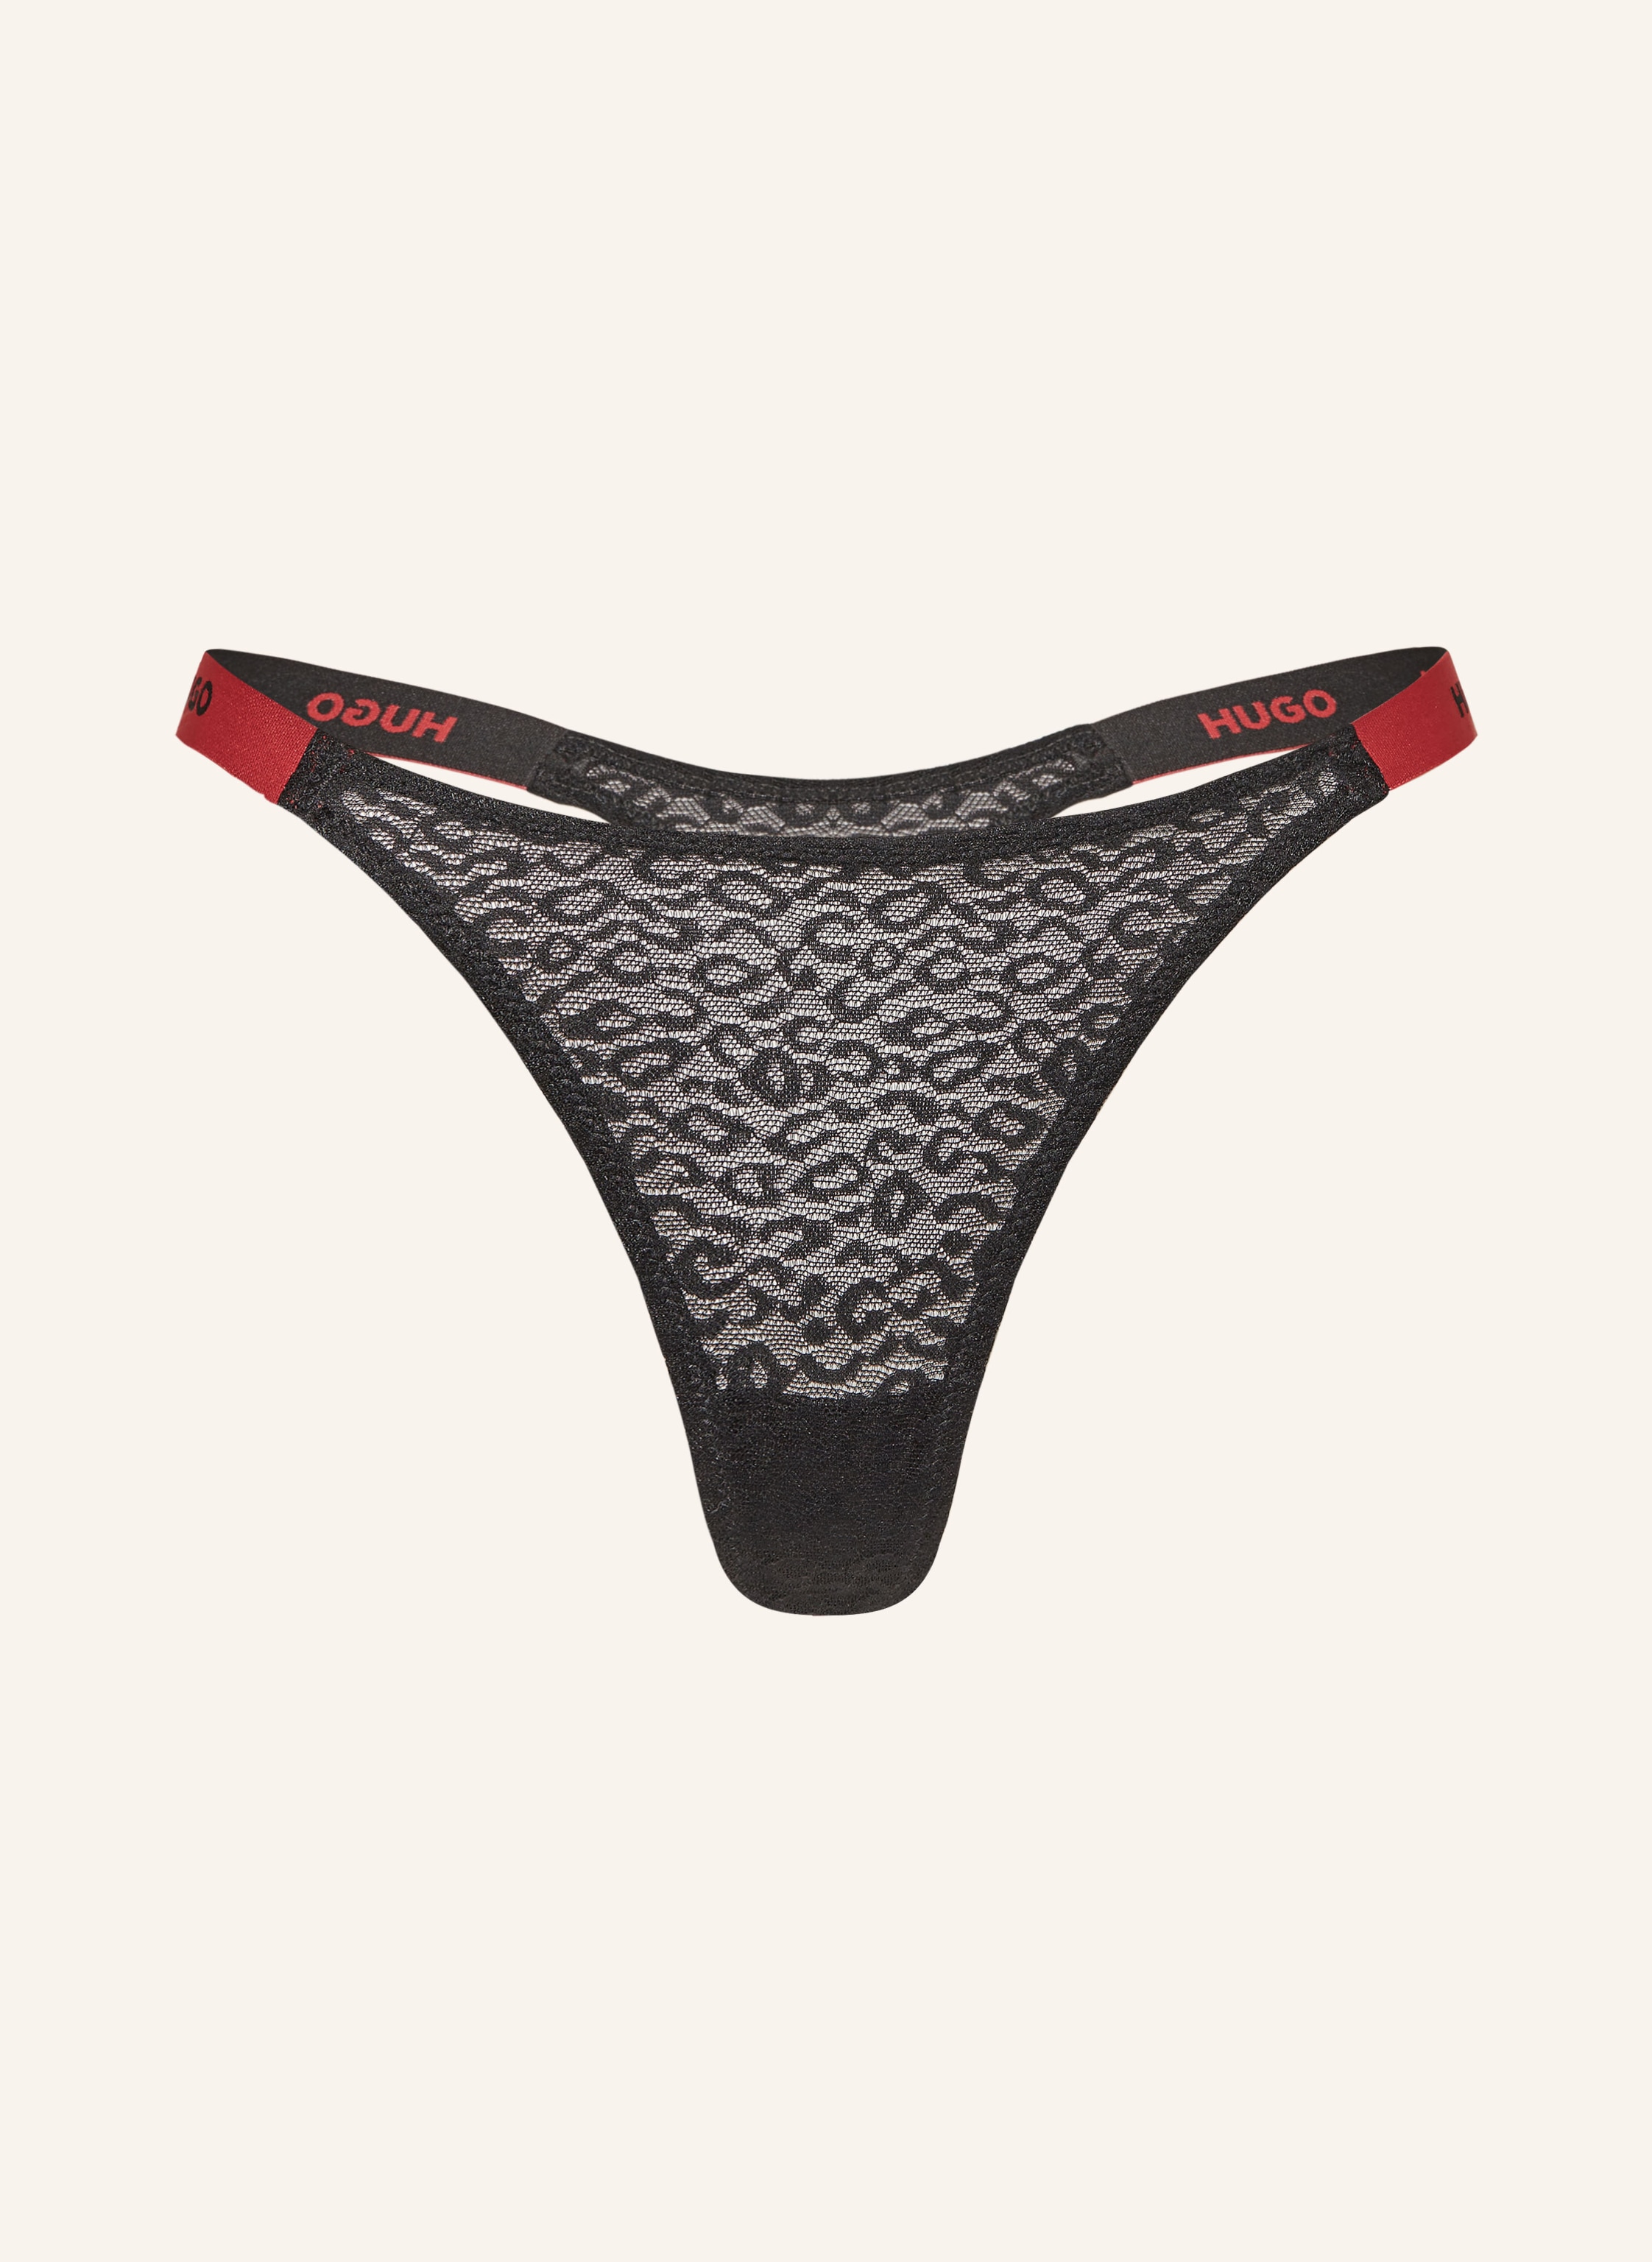 HUGO Thong SPORTY LACE in black/ red